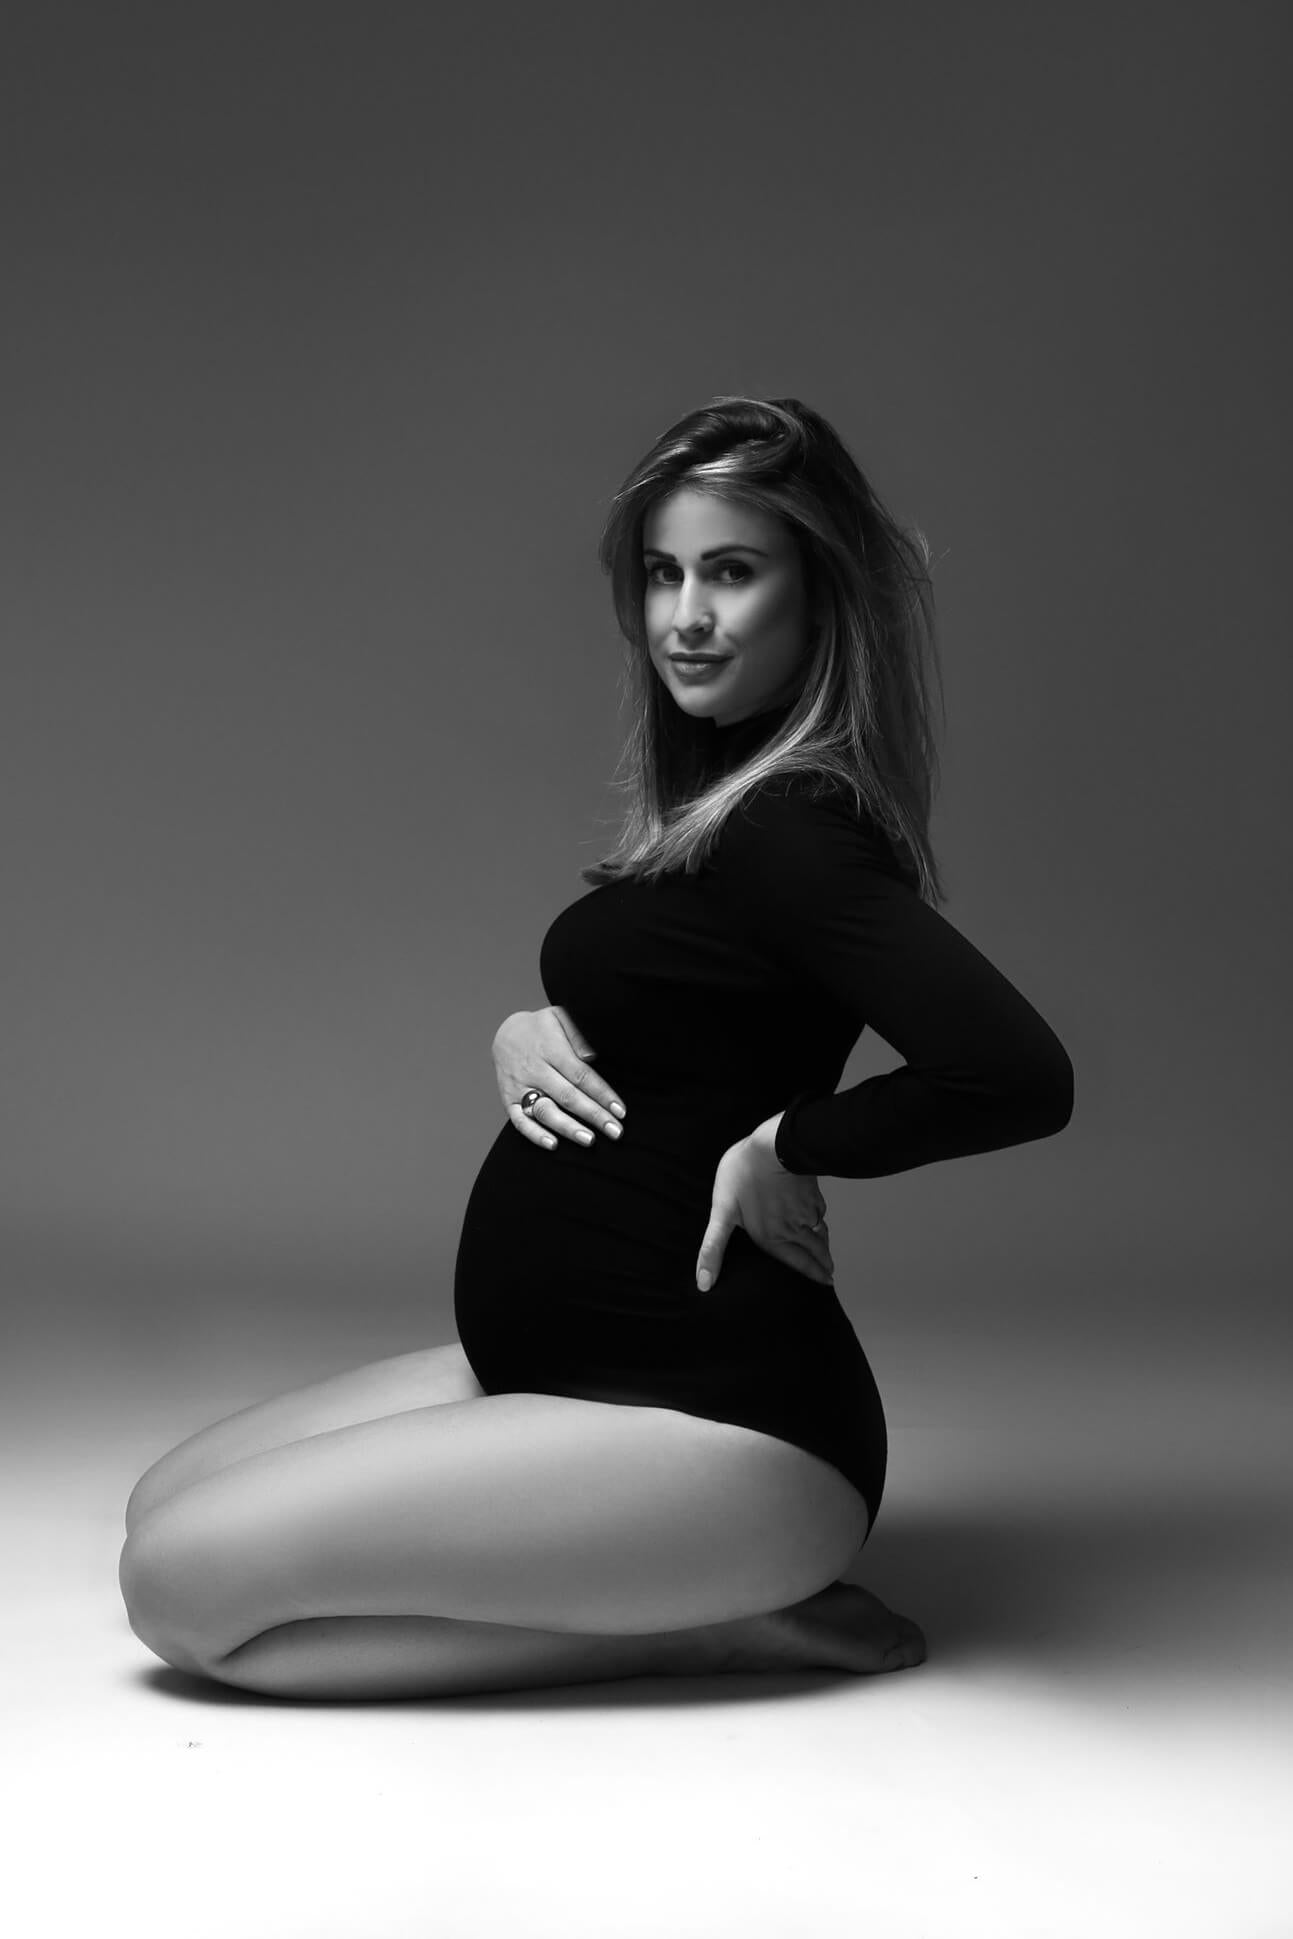 A pregnant model is wearing a black soft bodysuit. The bodysuit has a turtleneck and long sleeves. She is sitting on her knees